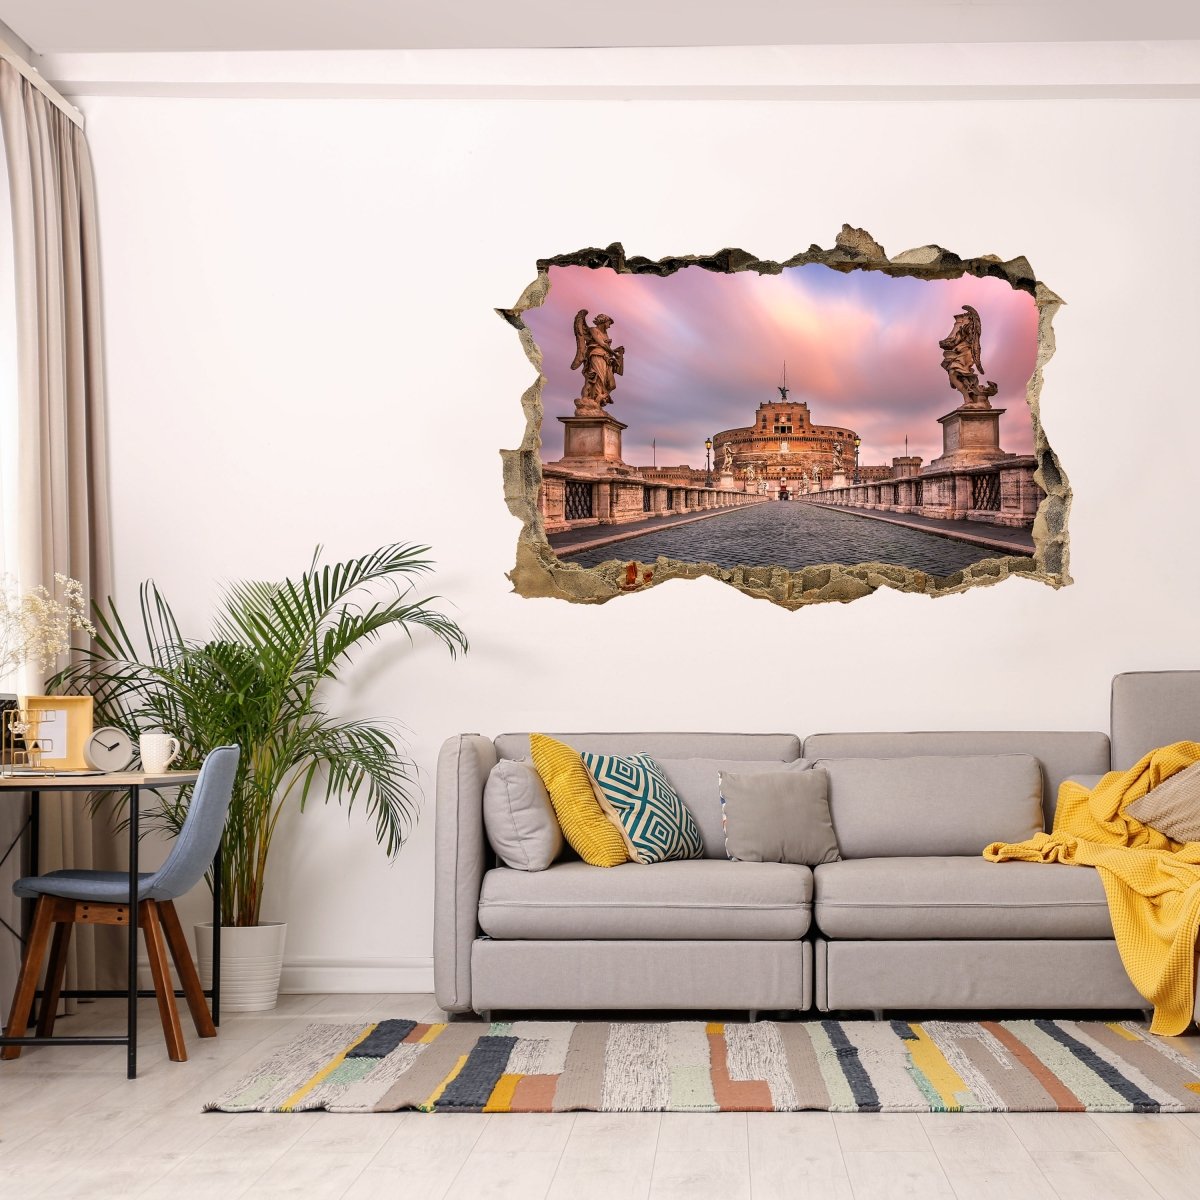 3D wall sticker Sant Angelo Bridge and Castle, Rome - Wall Decal M1035